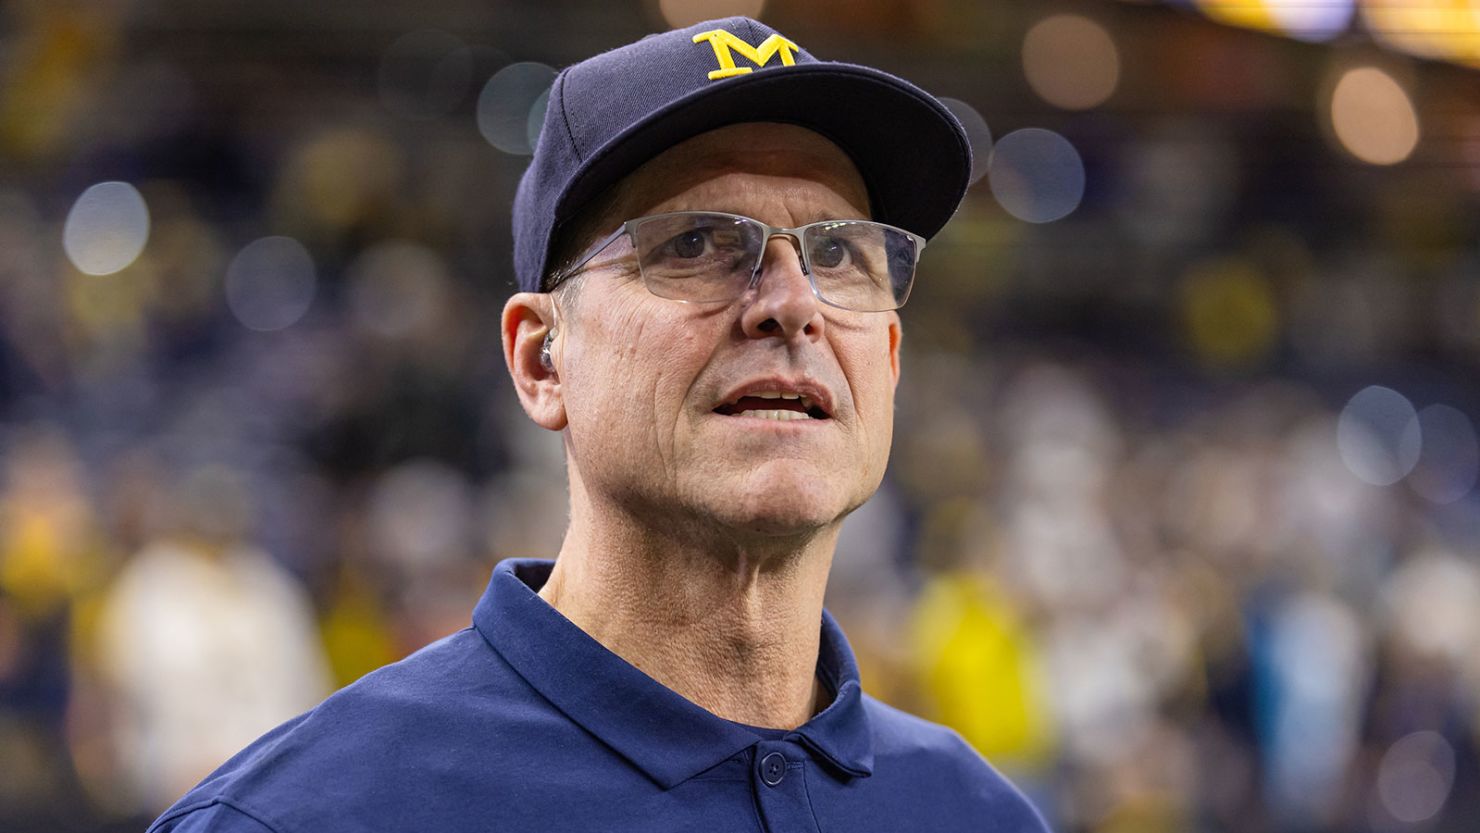 Head coach Jim Harbaugh led the Michigan Wolverines to a College Football Playoff national championship earlier this month.